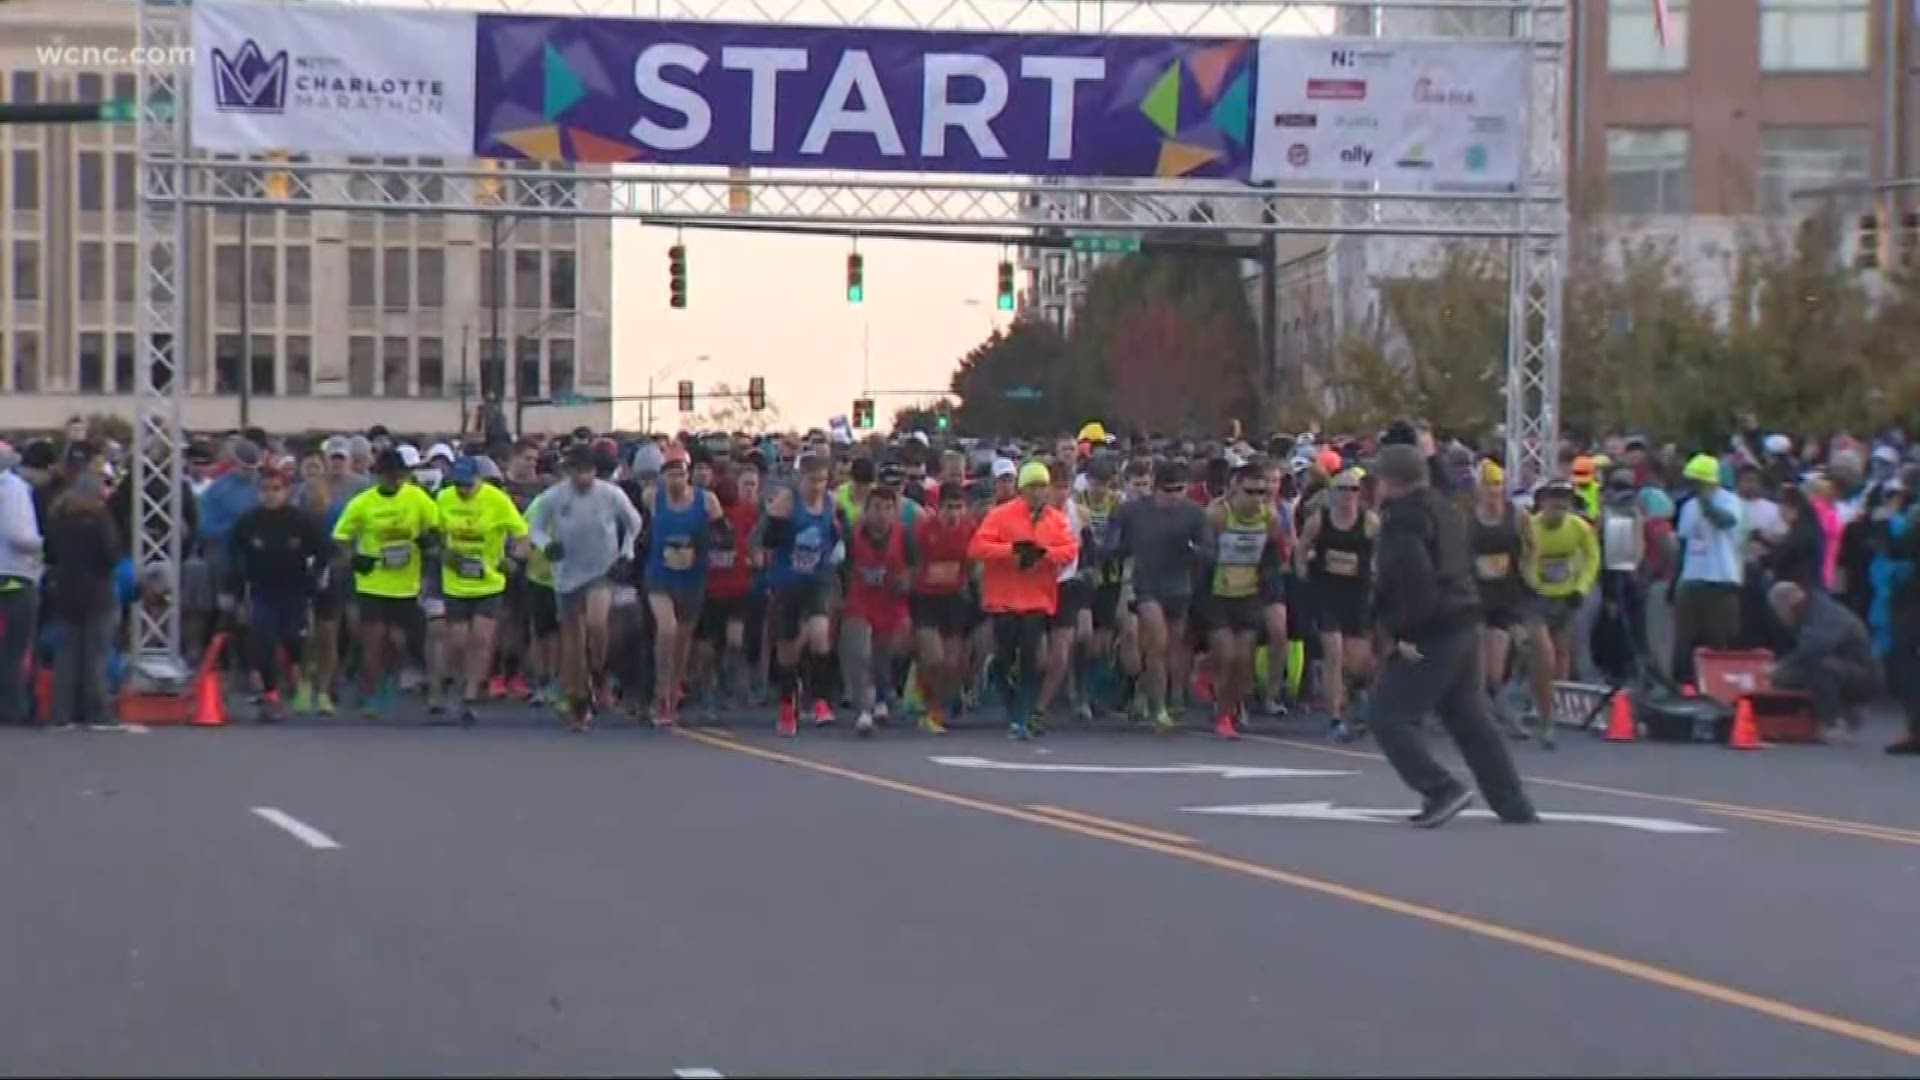 The marathon is sold out with over 6,000 runners. The race starts art 7:30 am Saturday.